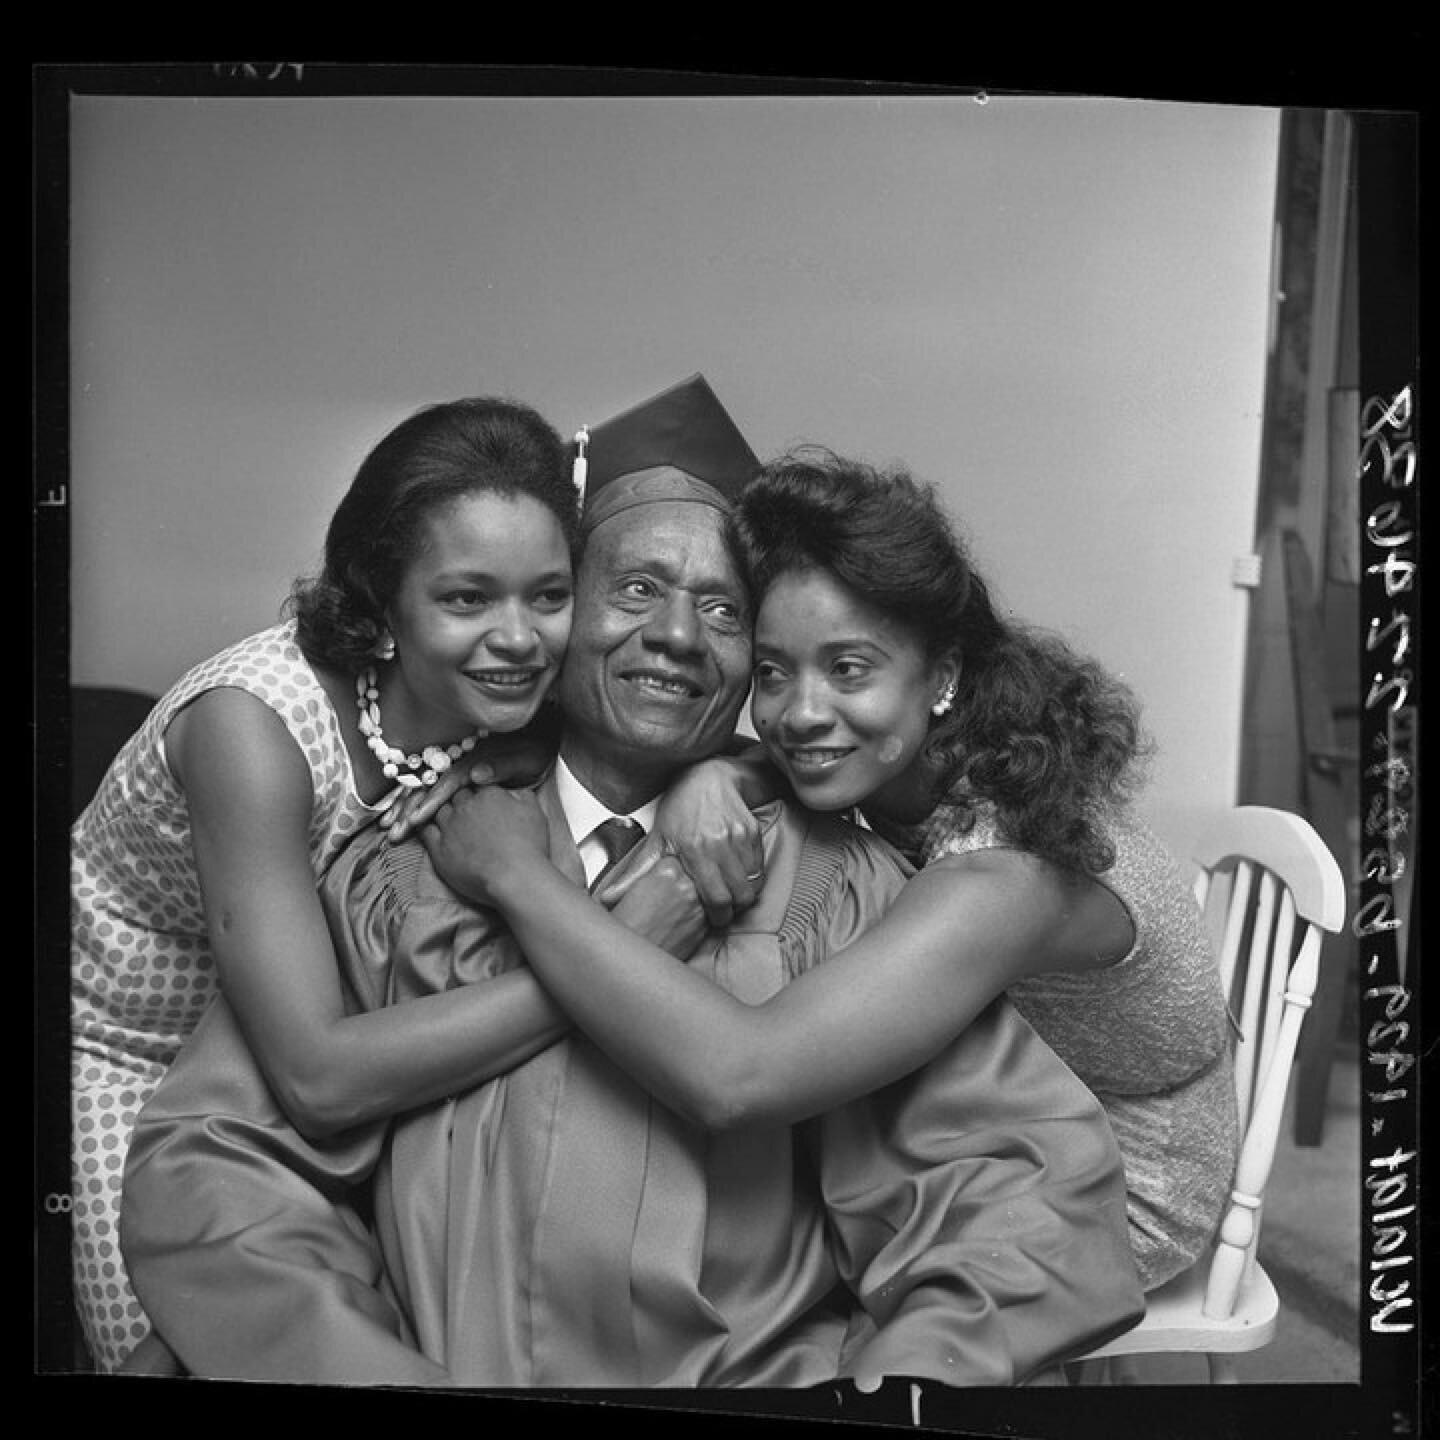 &ldquo;Daniel Elmore, a 72-year-old handyman, is congratulated by two daughters, Joyce Elmore, left, and Clara Sanderson, two of nine living children, on graduation from Jordan High School in 1964. He saw to it that all 10 of children got college deg